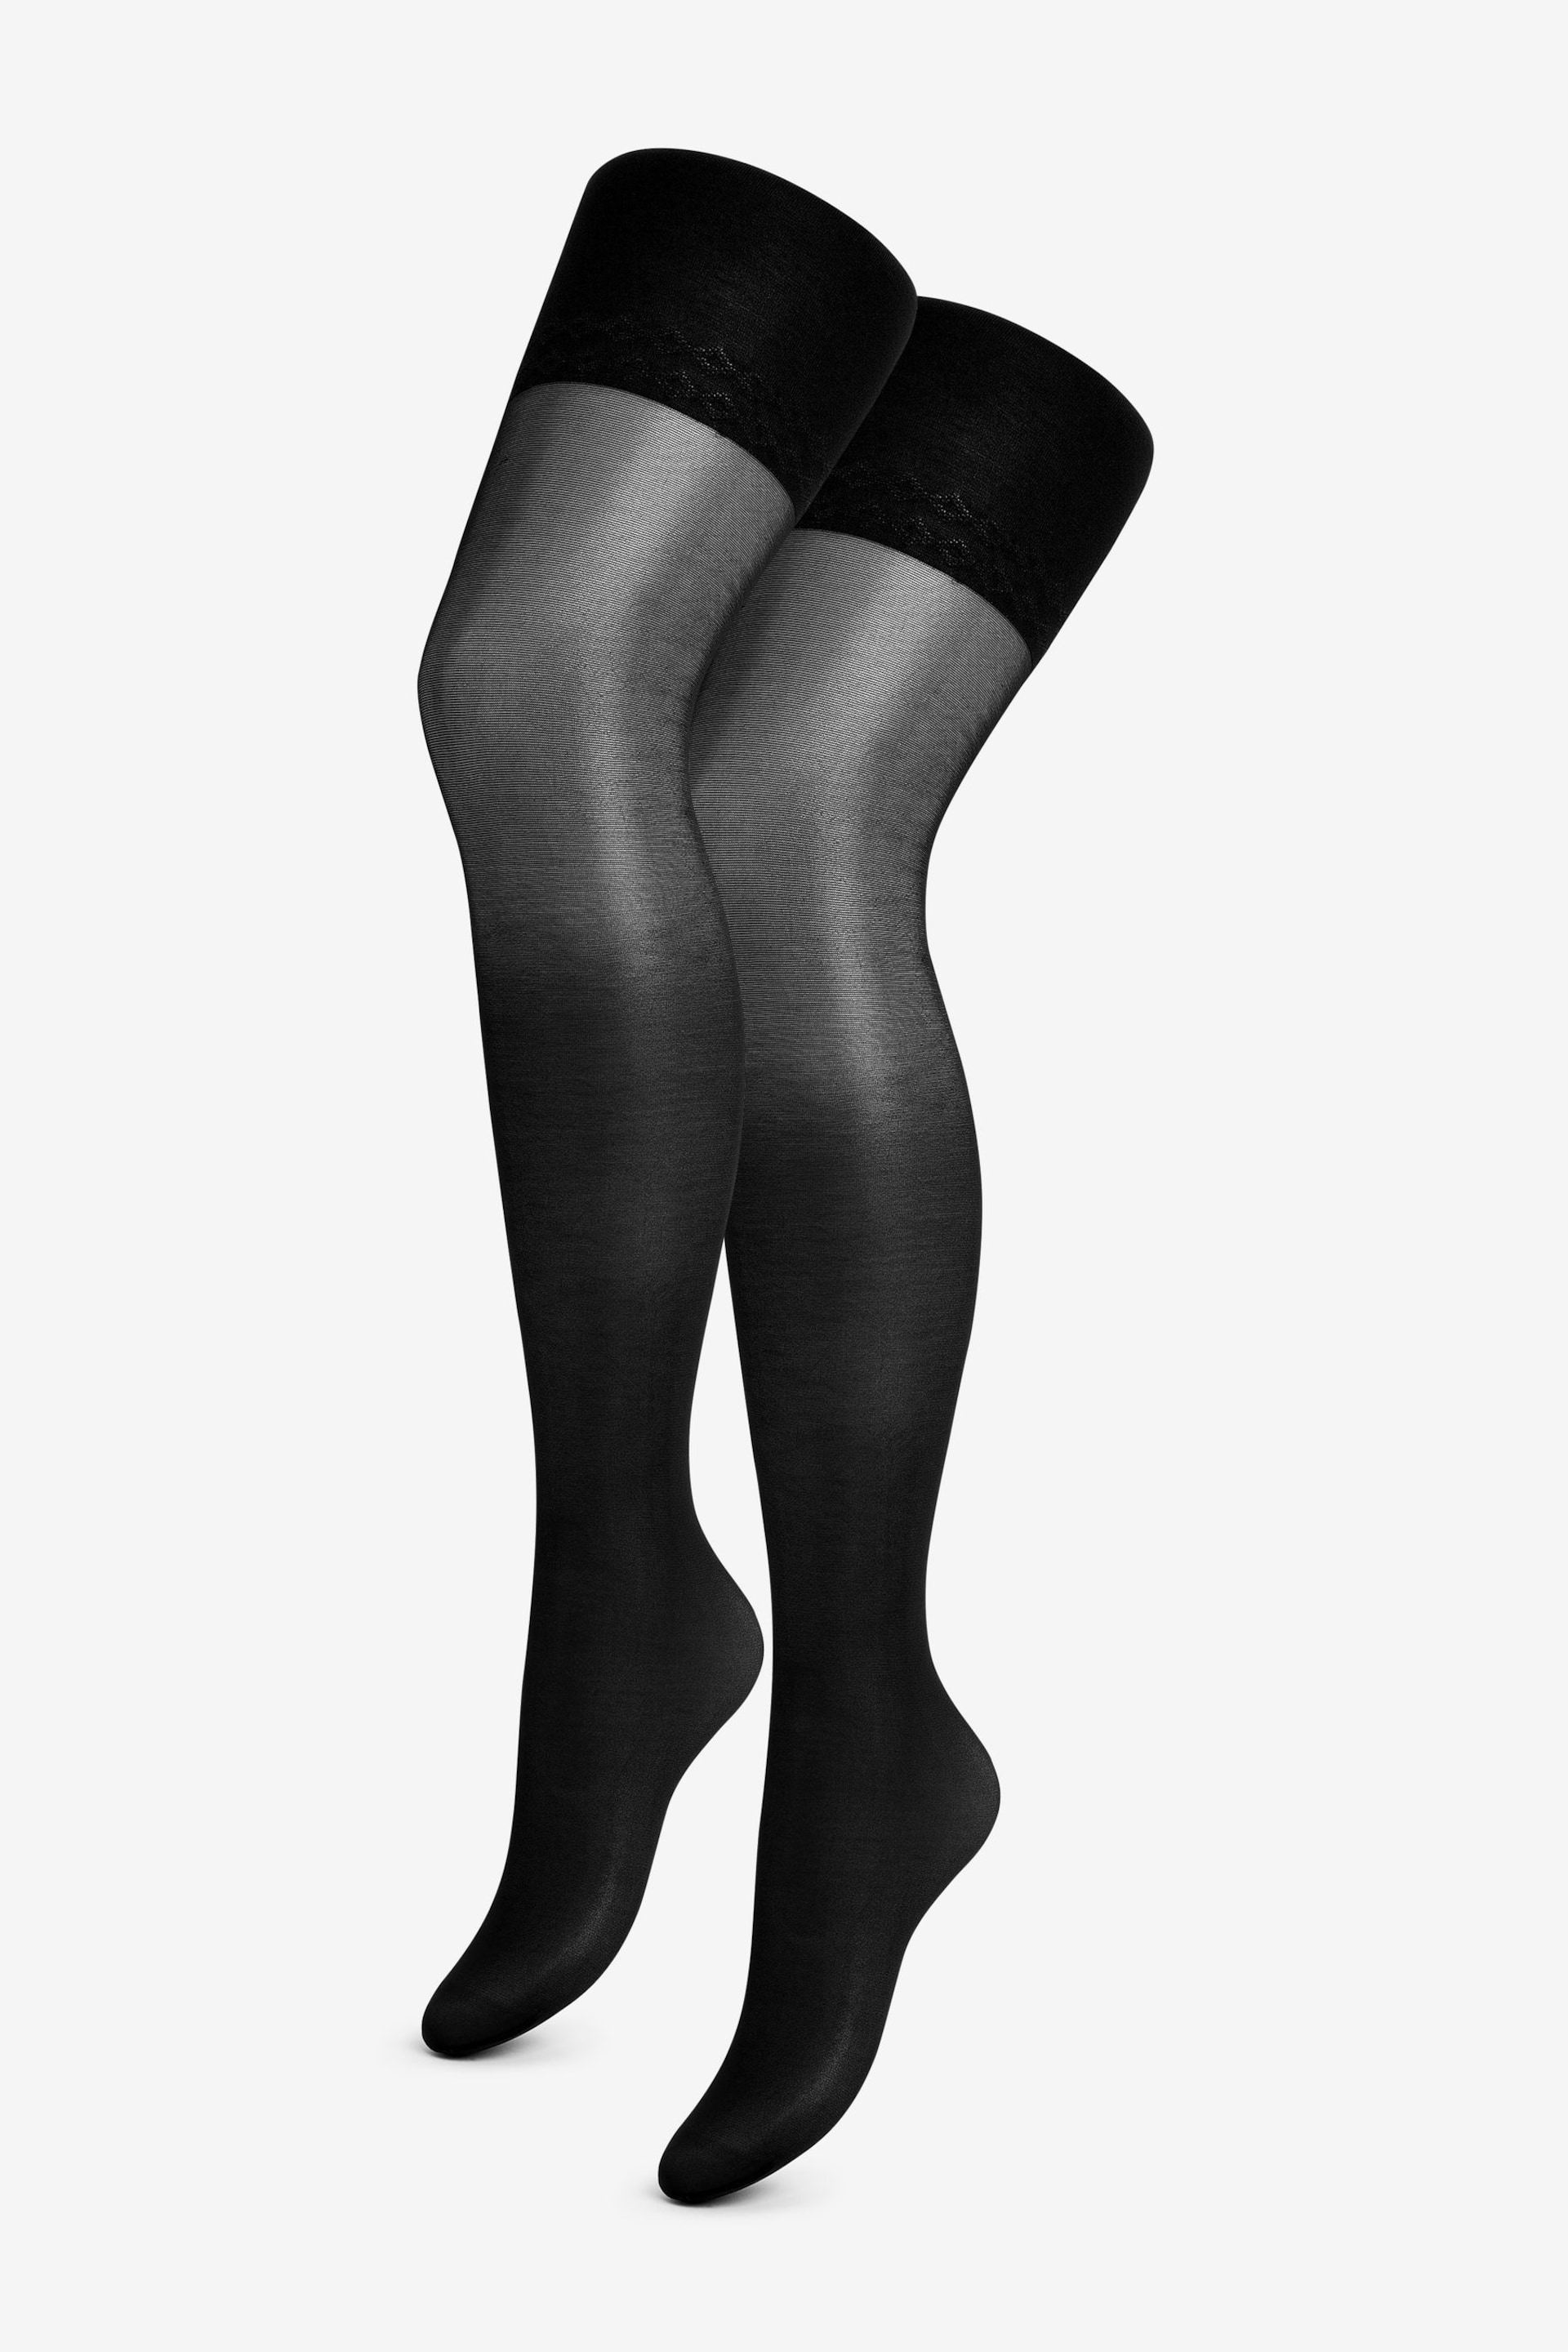 Pretty Polly 20 Denier Bodyshaping Sheer Longline Tights 2 Pack - Image 1 of 3